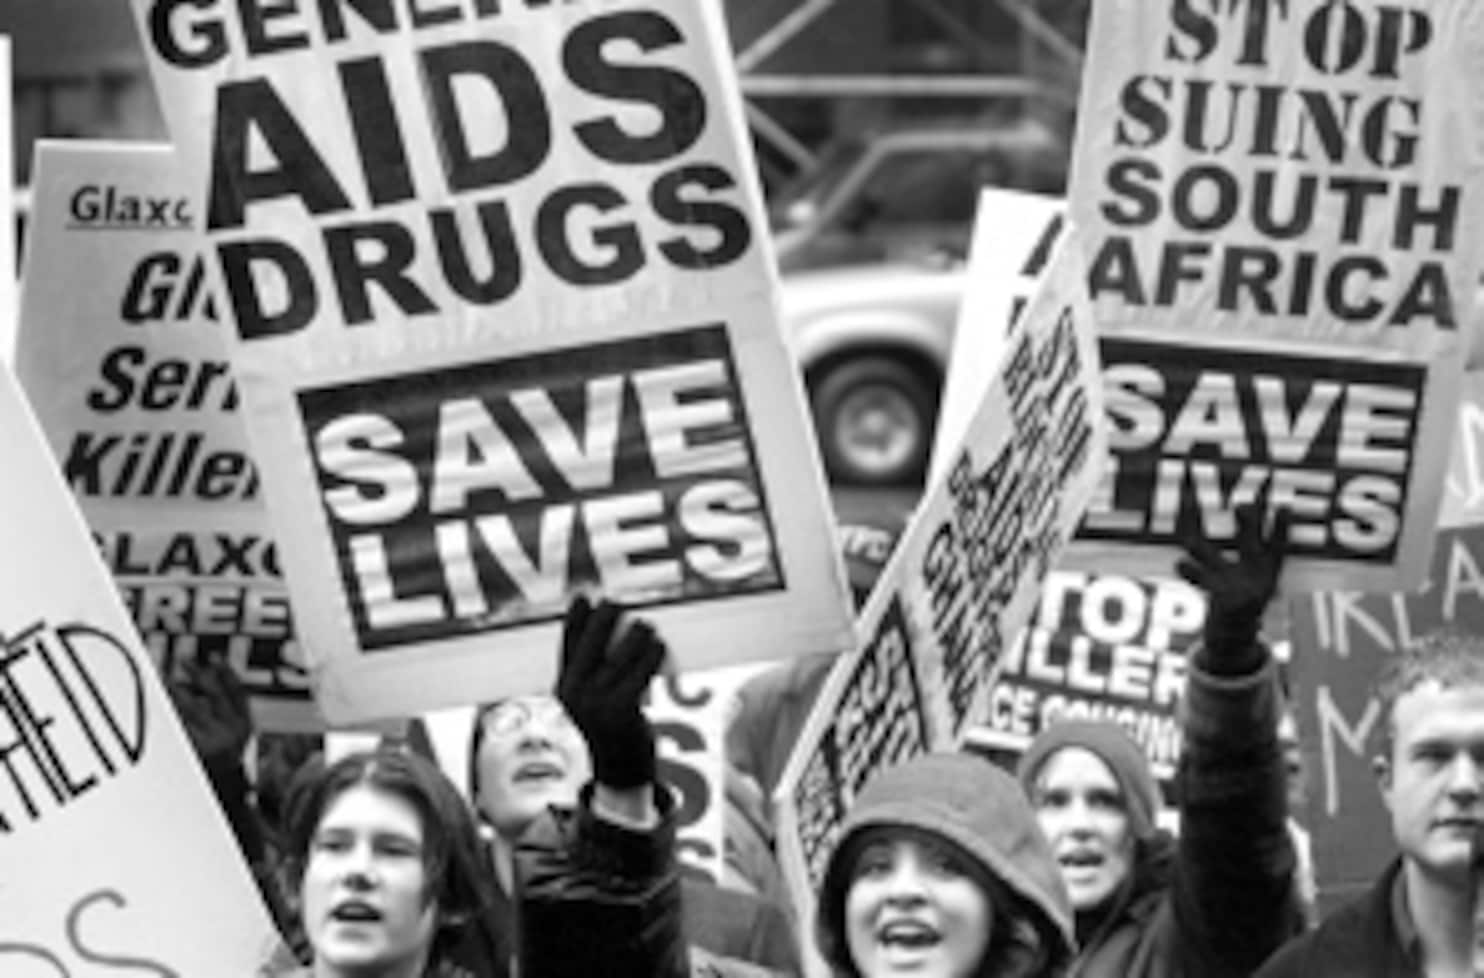 A look at the history of AIDS in the U.S.